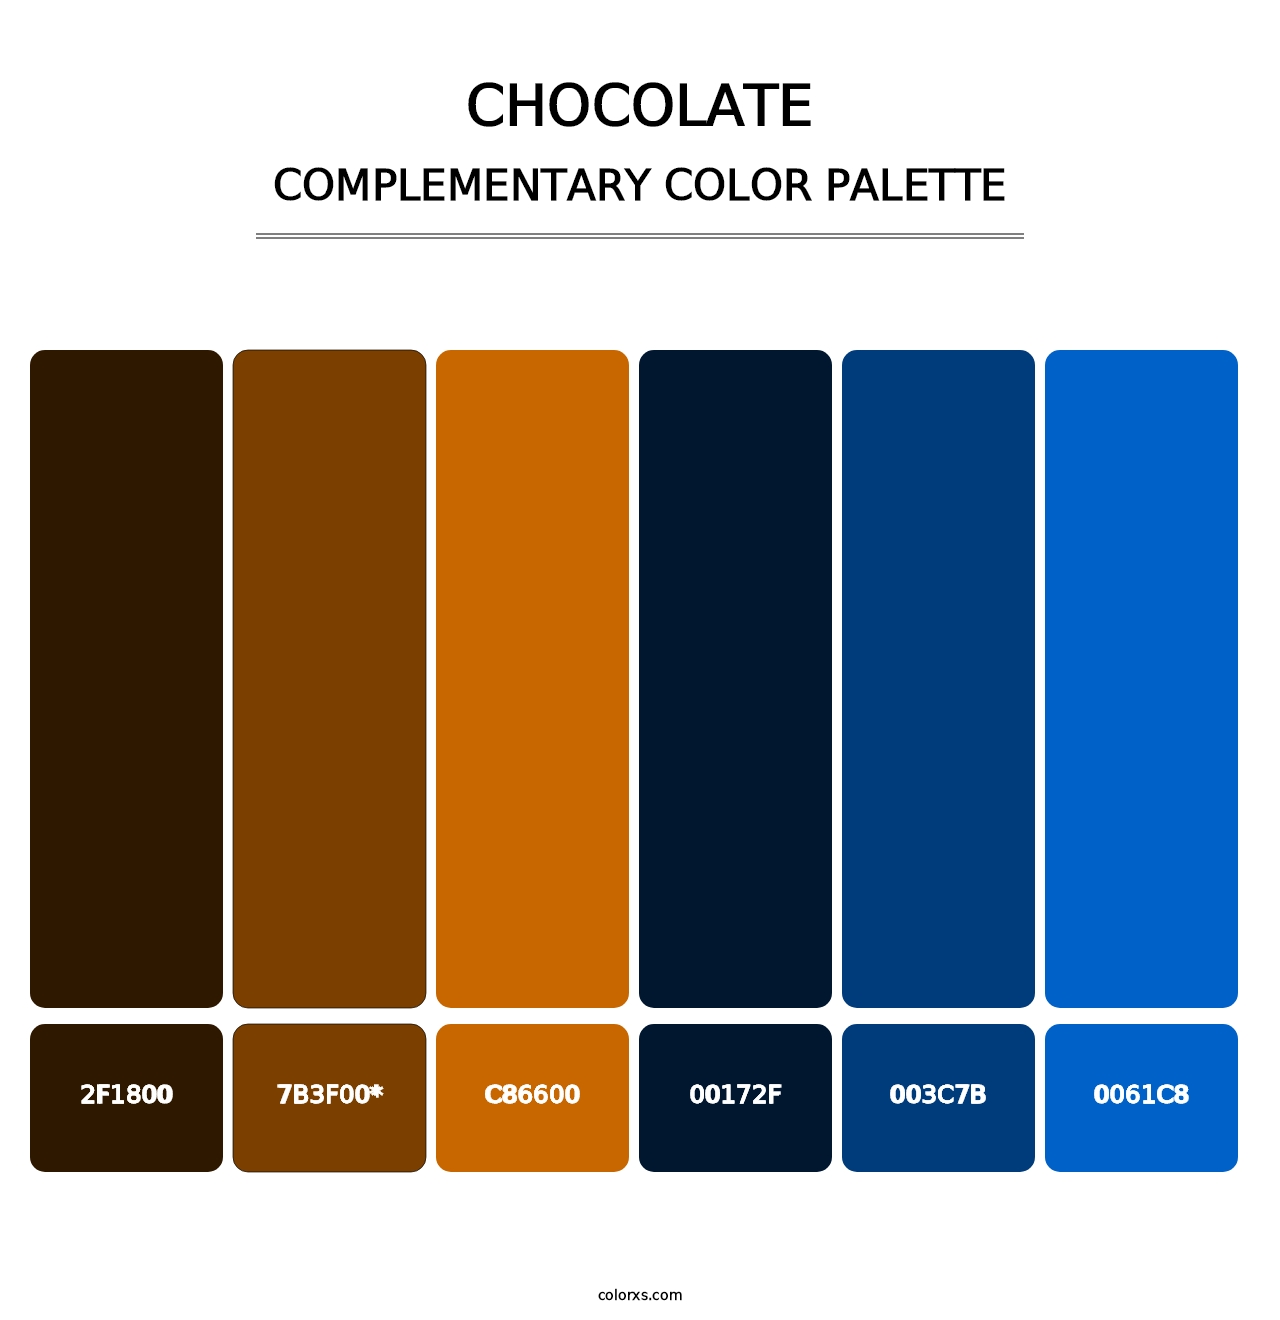 Chocolate - Complementary Color Palette